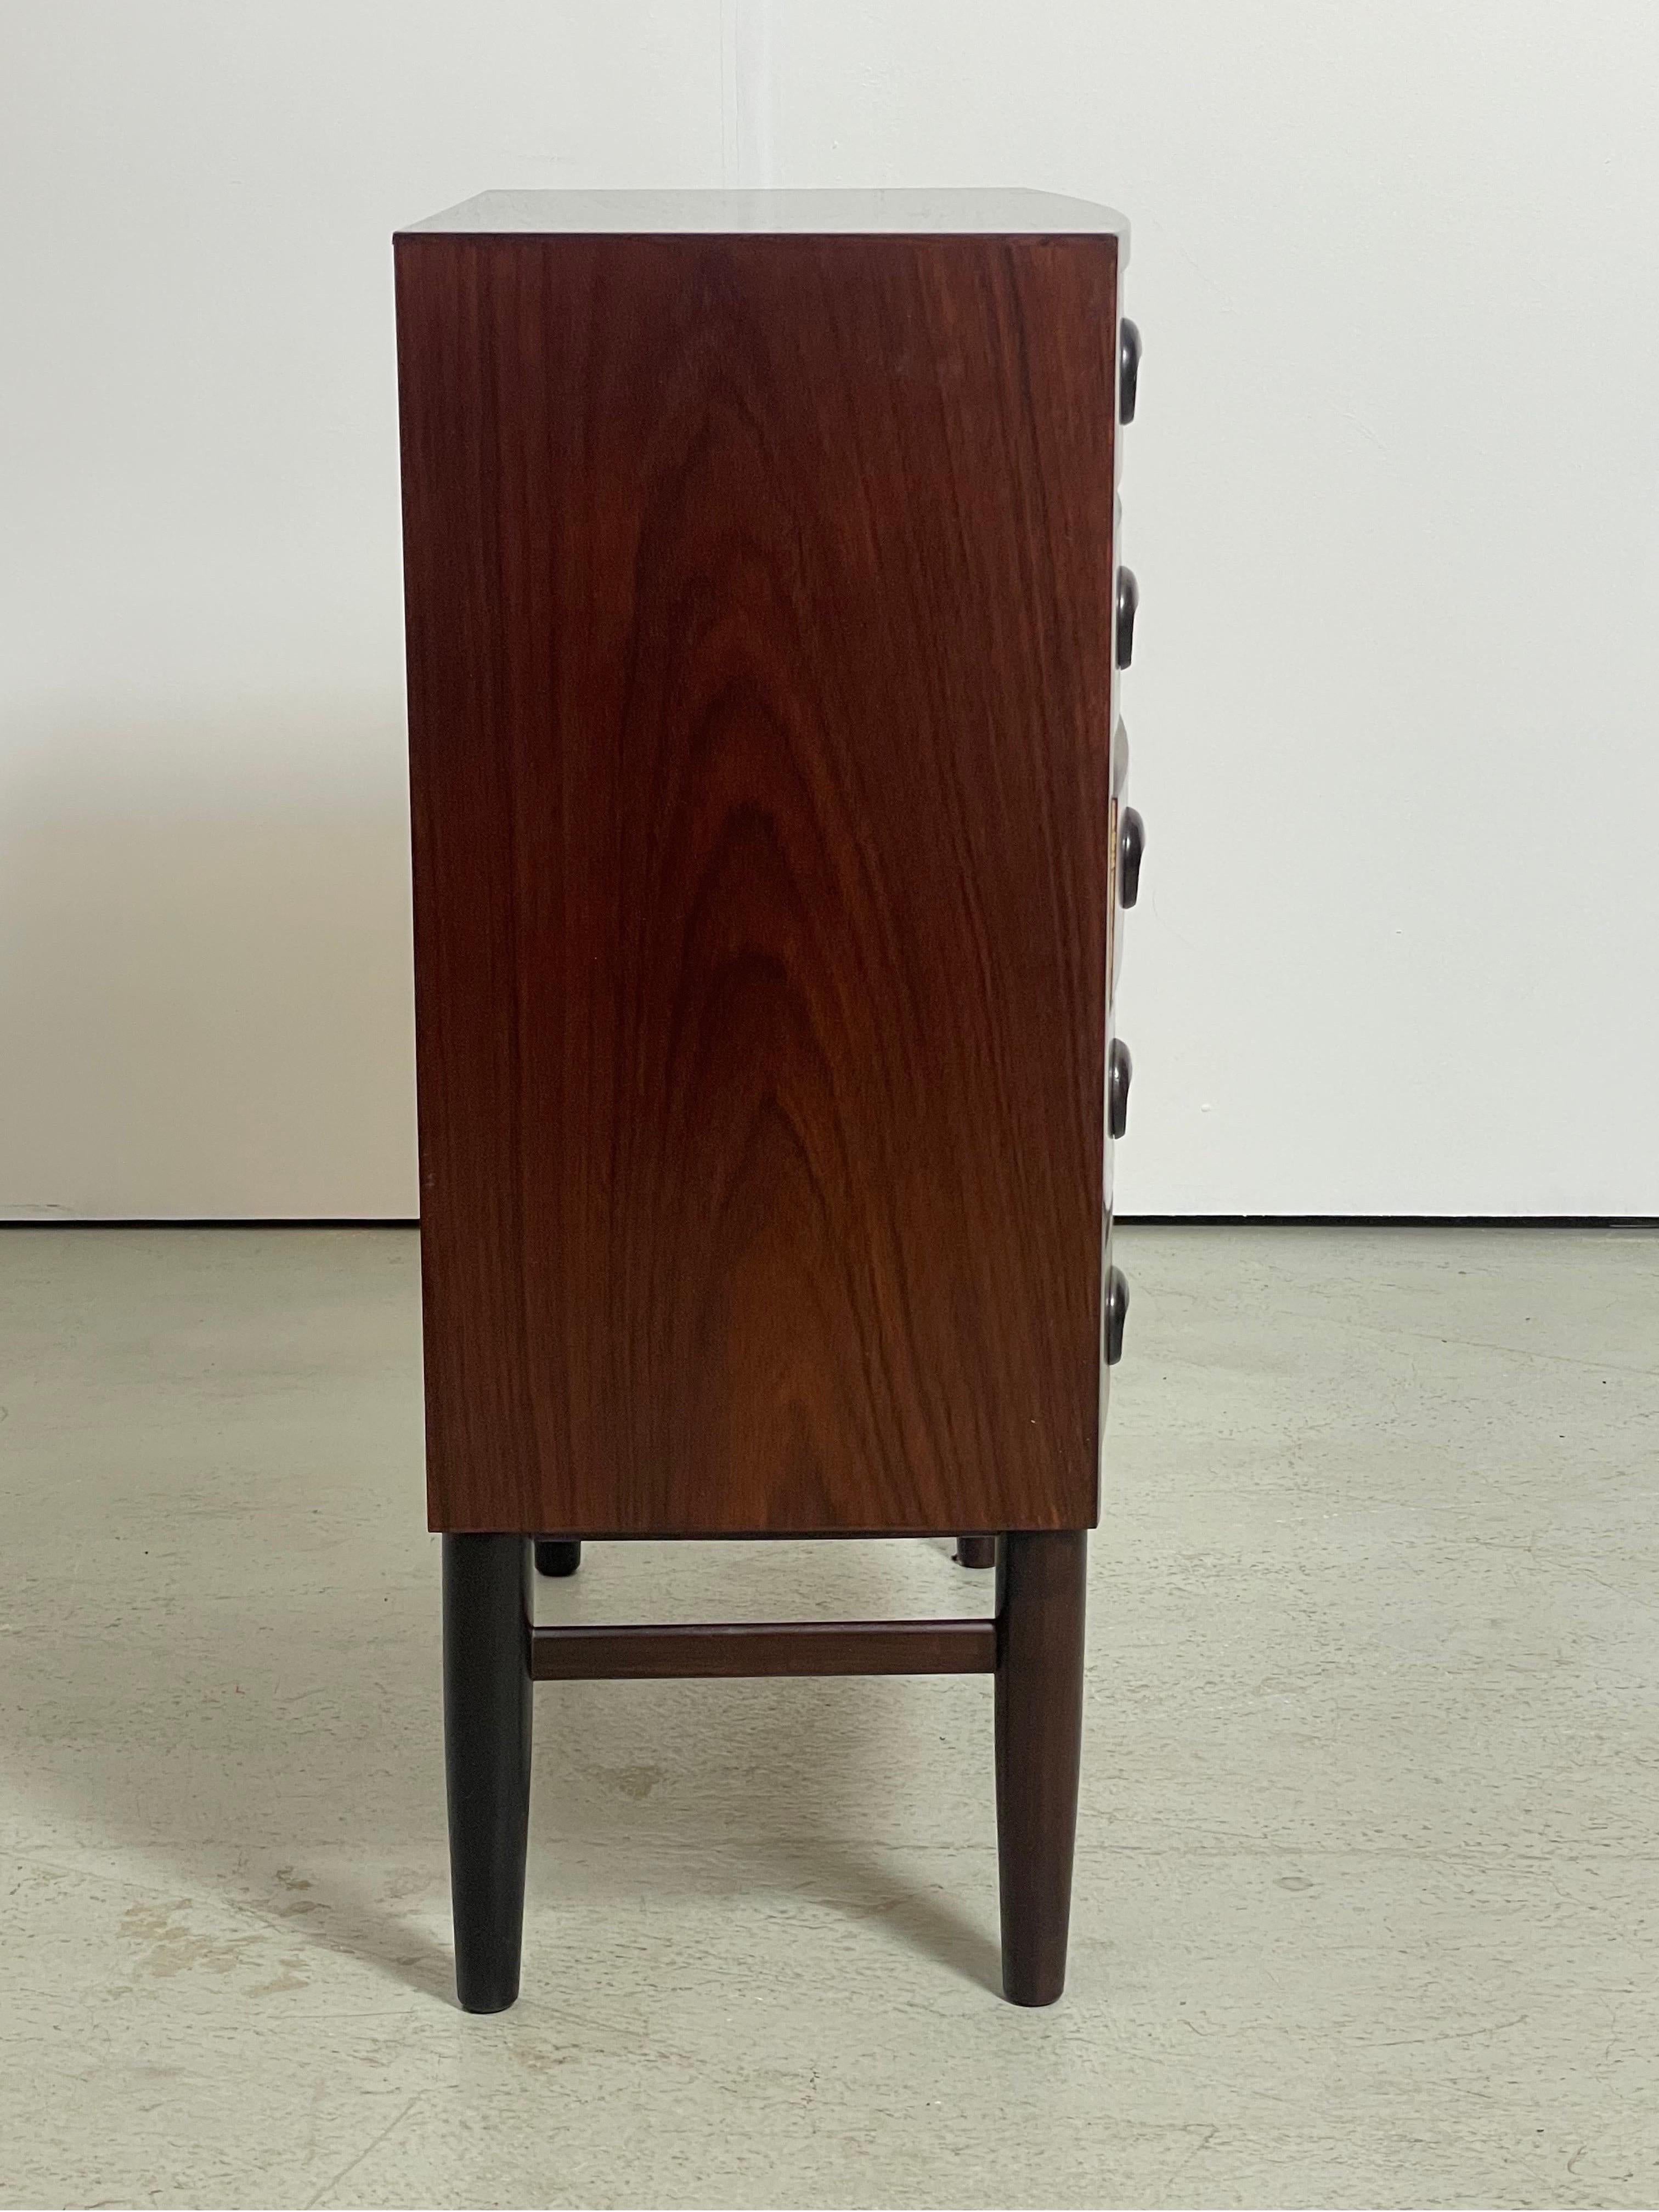 20th Century Danish Chest of Drawers in Palisander by Kai Kristiansen 1960s For Sale